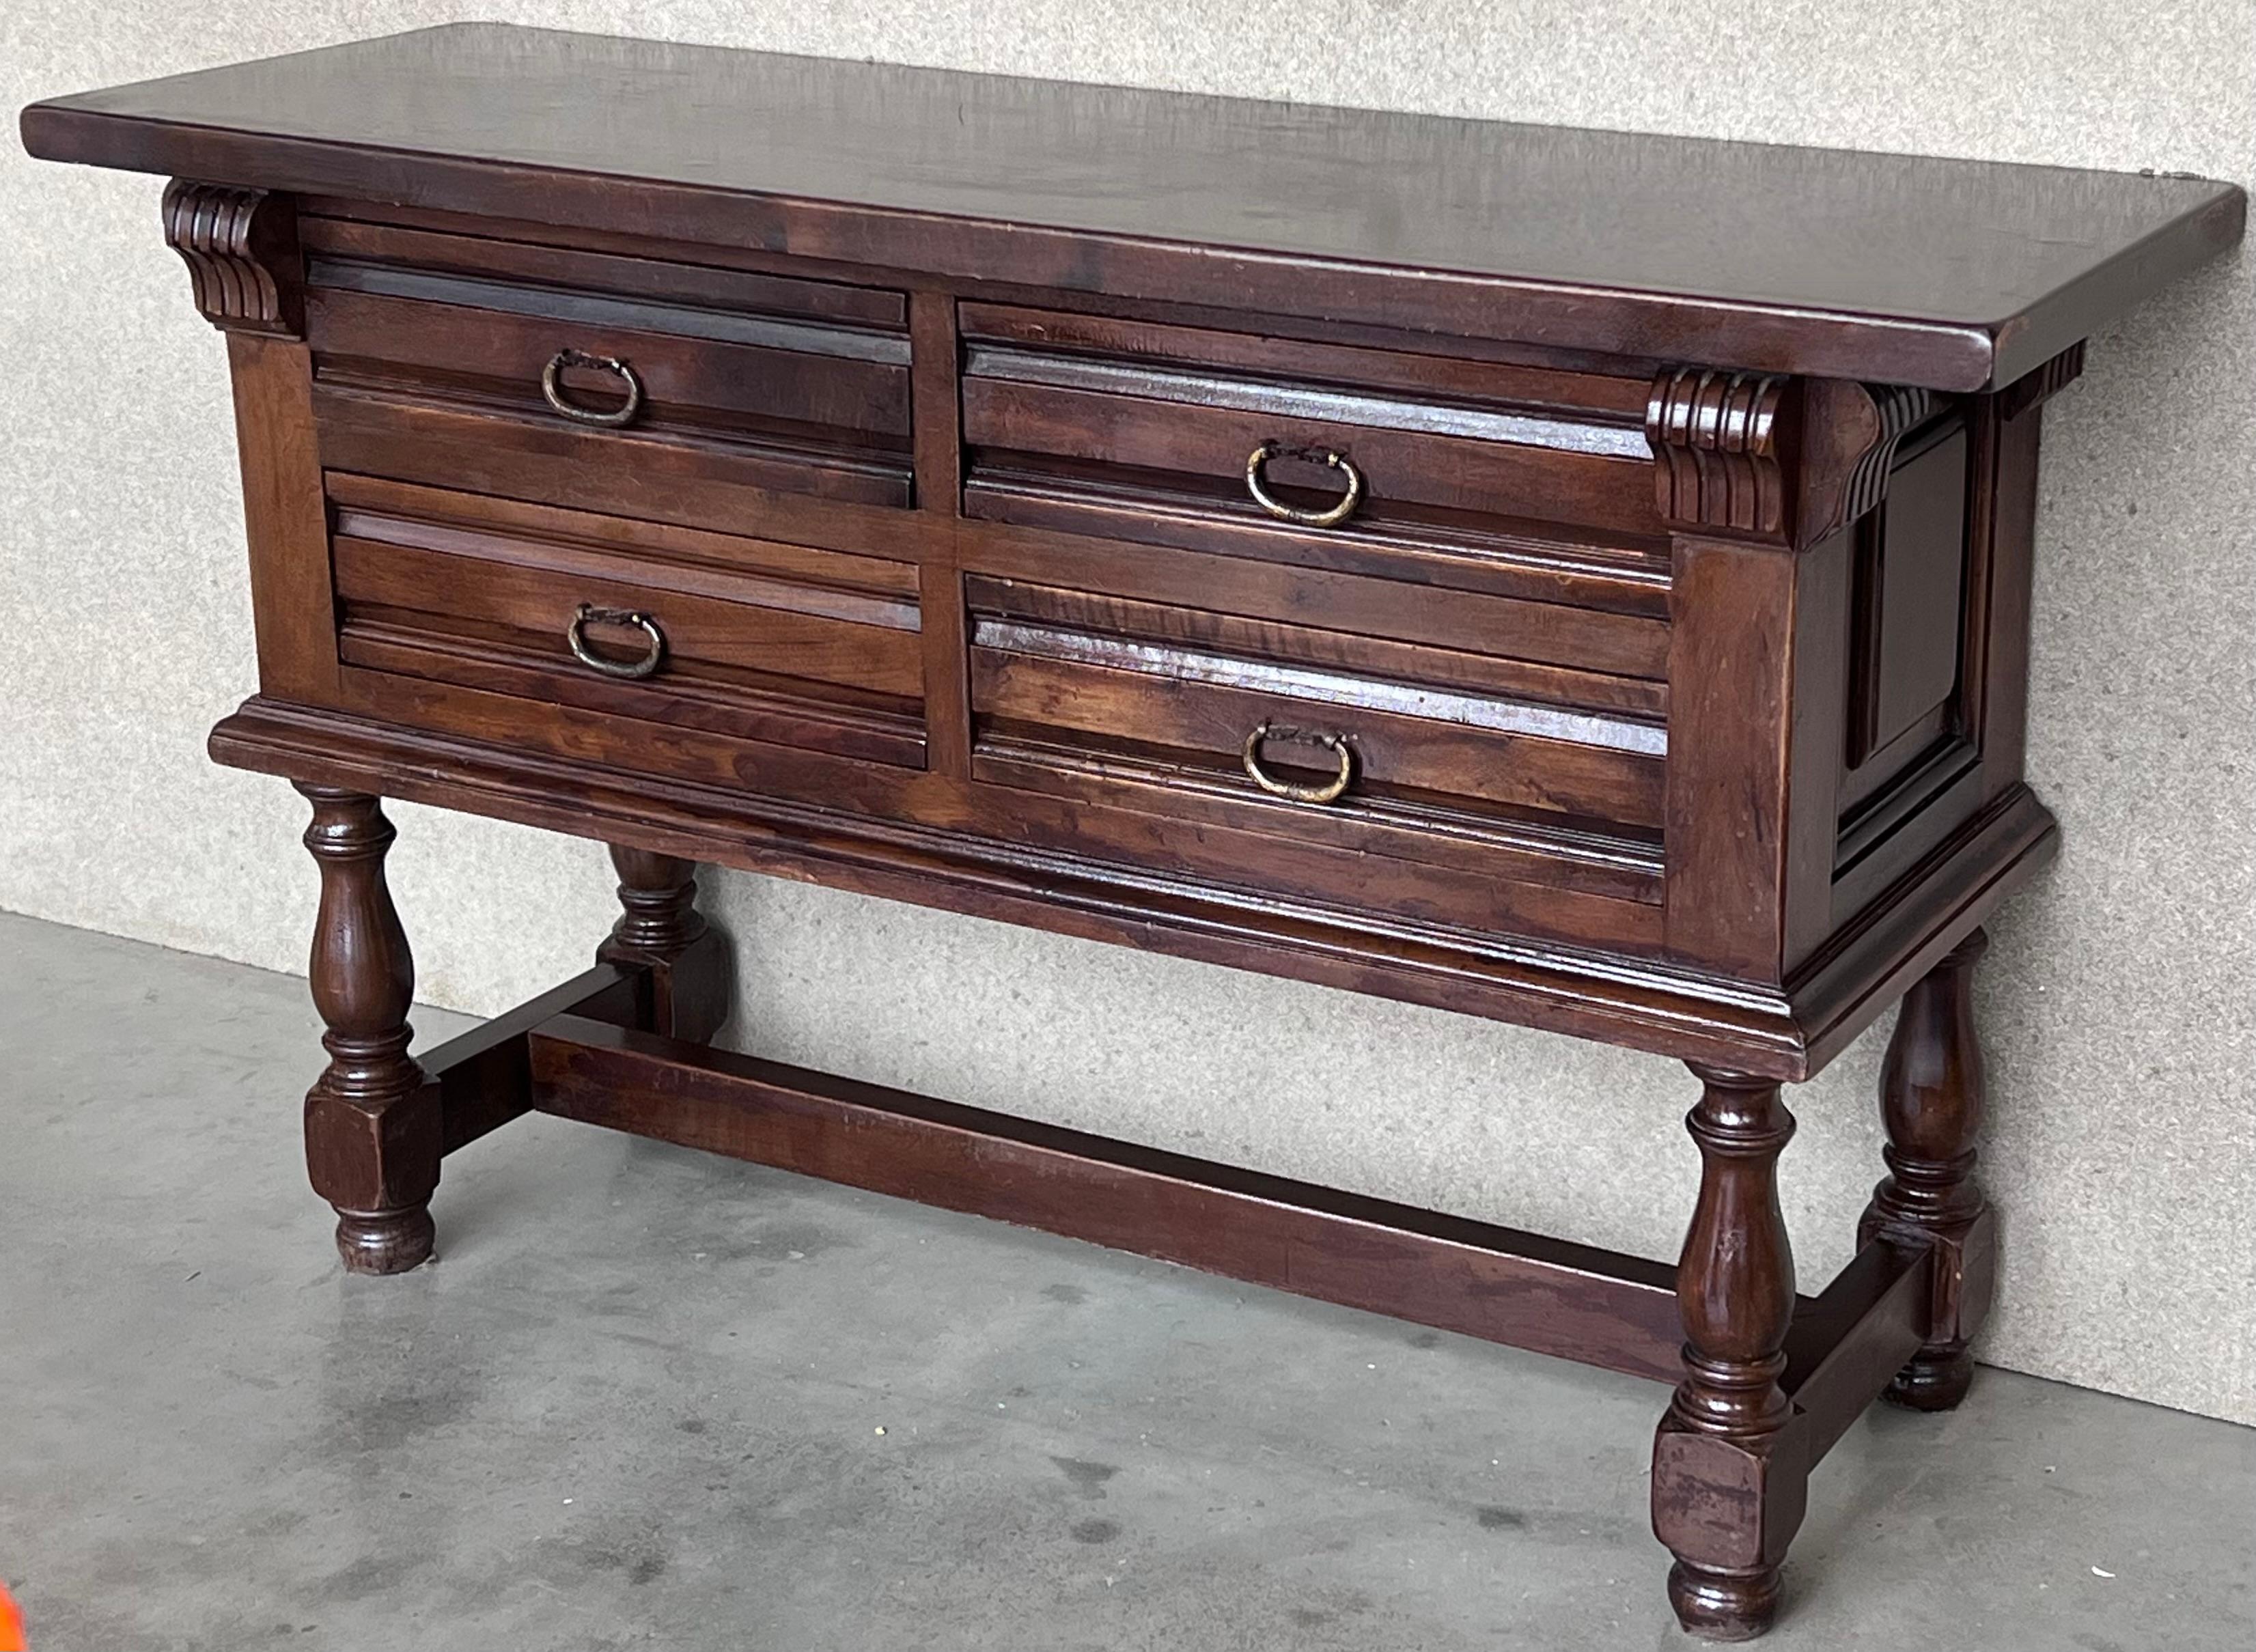 This large Spanish early 20th century features a beautiful one plank rectangular top over four wide carved drawers. Each drawer, featuring slightly different hardware, is adorned with edges and original handmade drop pulls The ensemble shows the